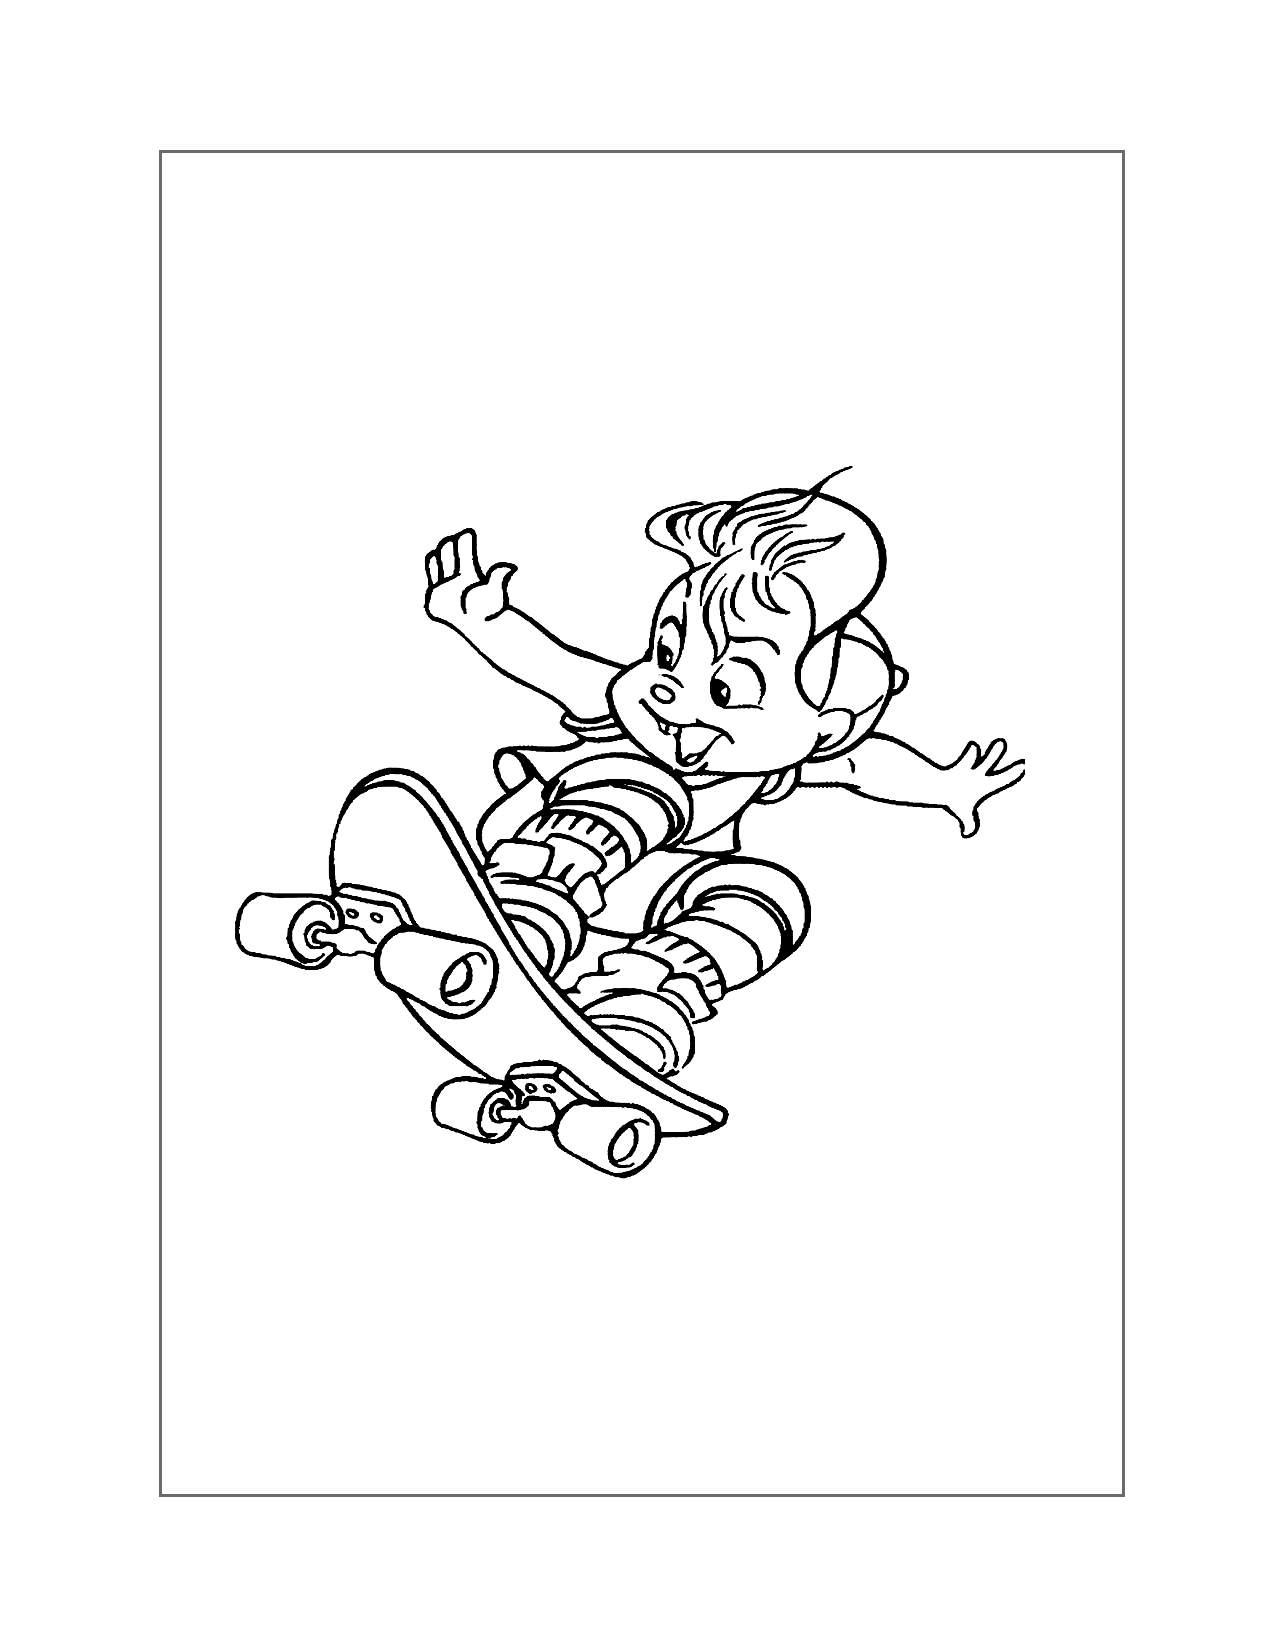 Alvin Riding Skateboard Coloring Page